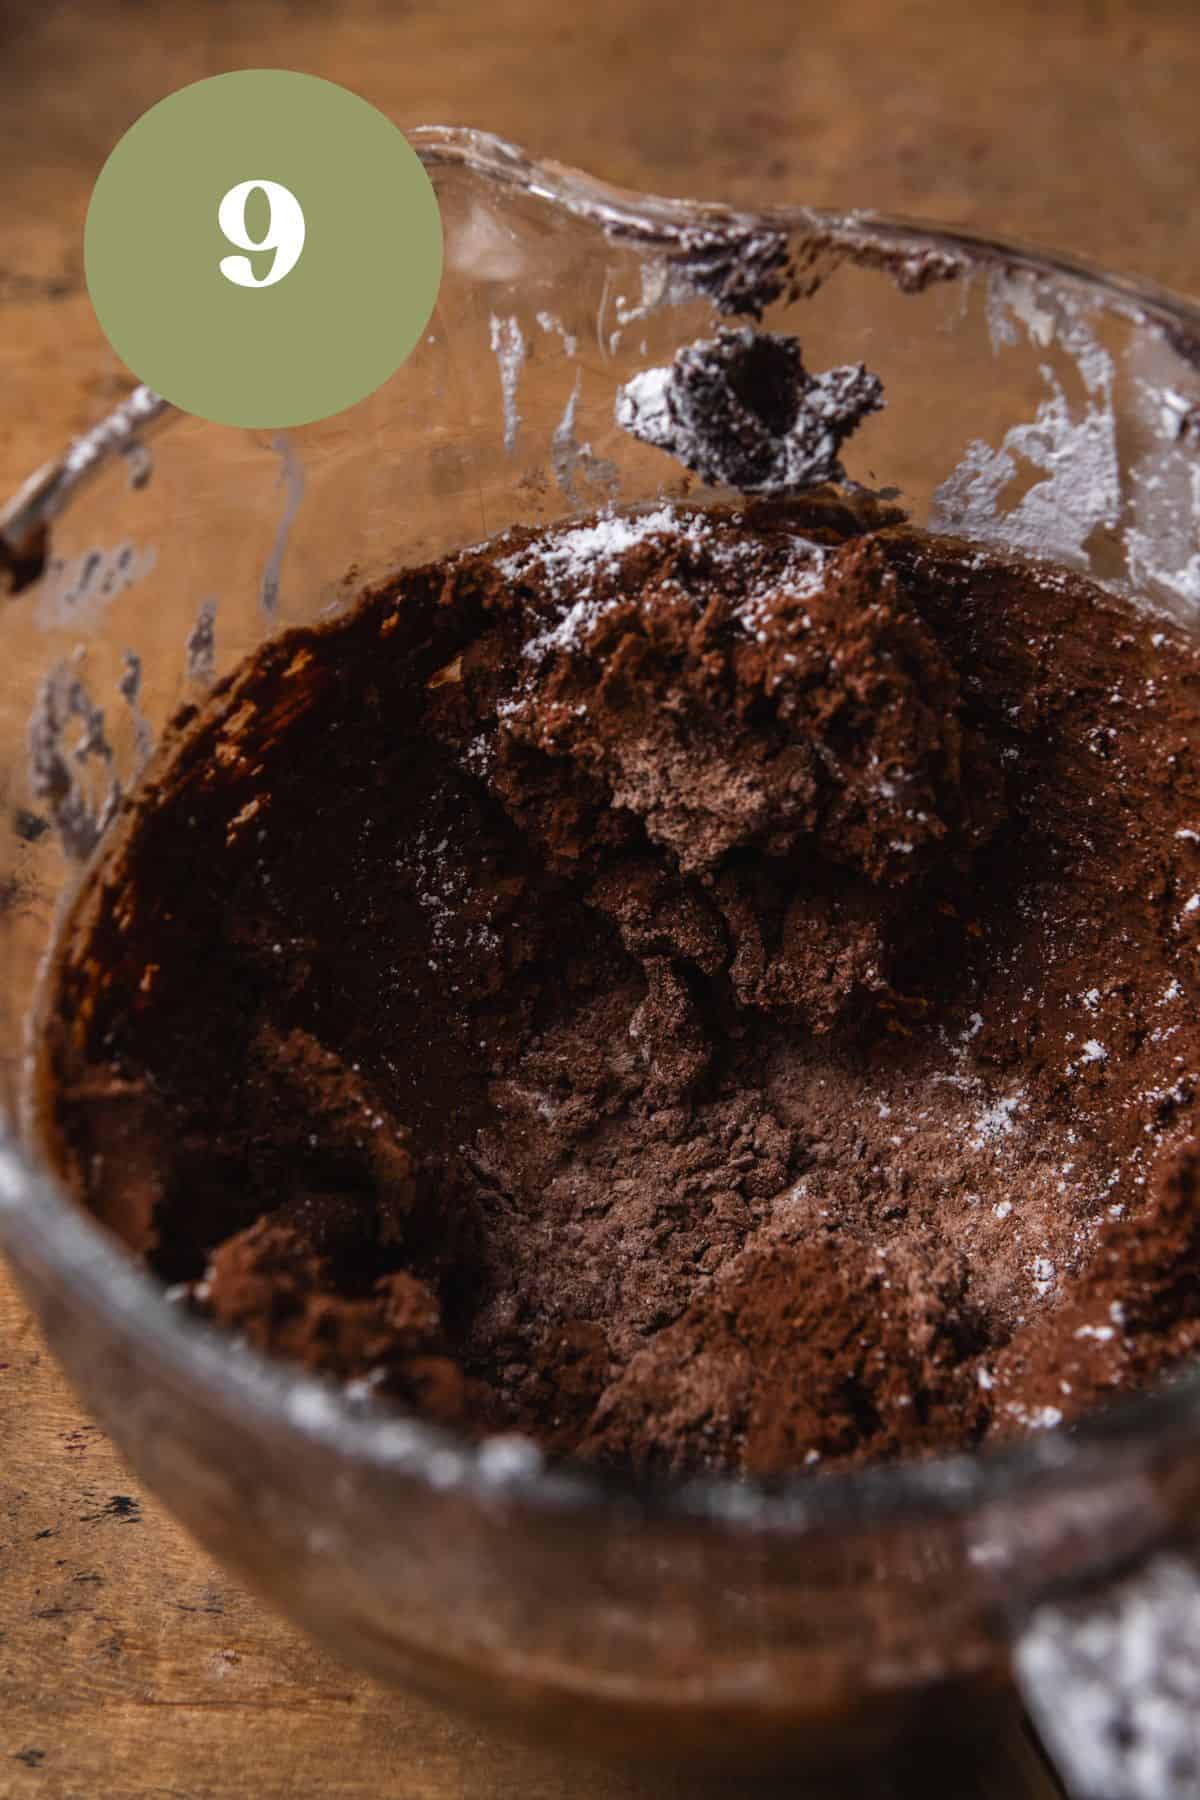 Butter, cocoa powder, and powdered sugar mixed together in a glass bowl.